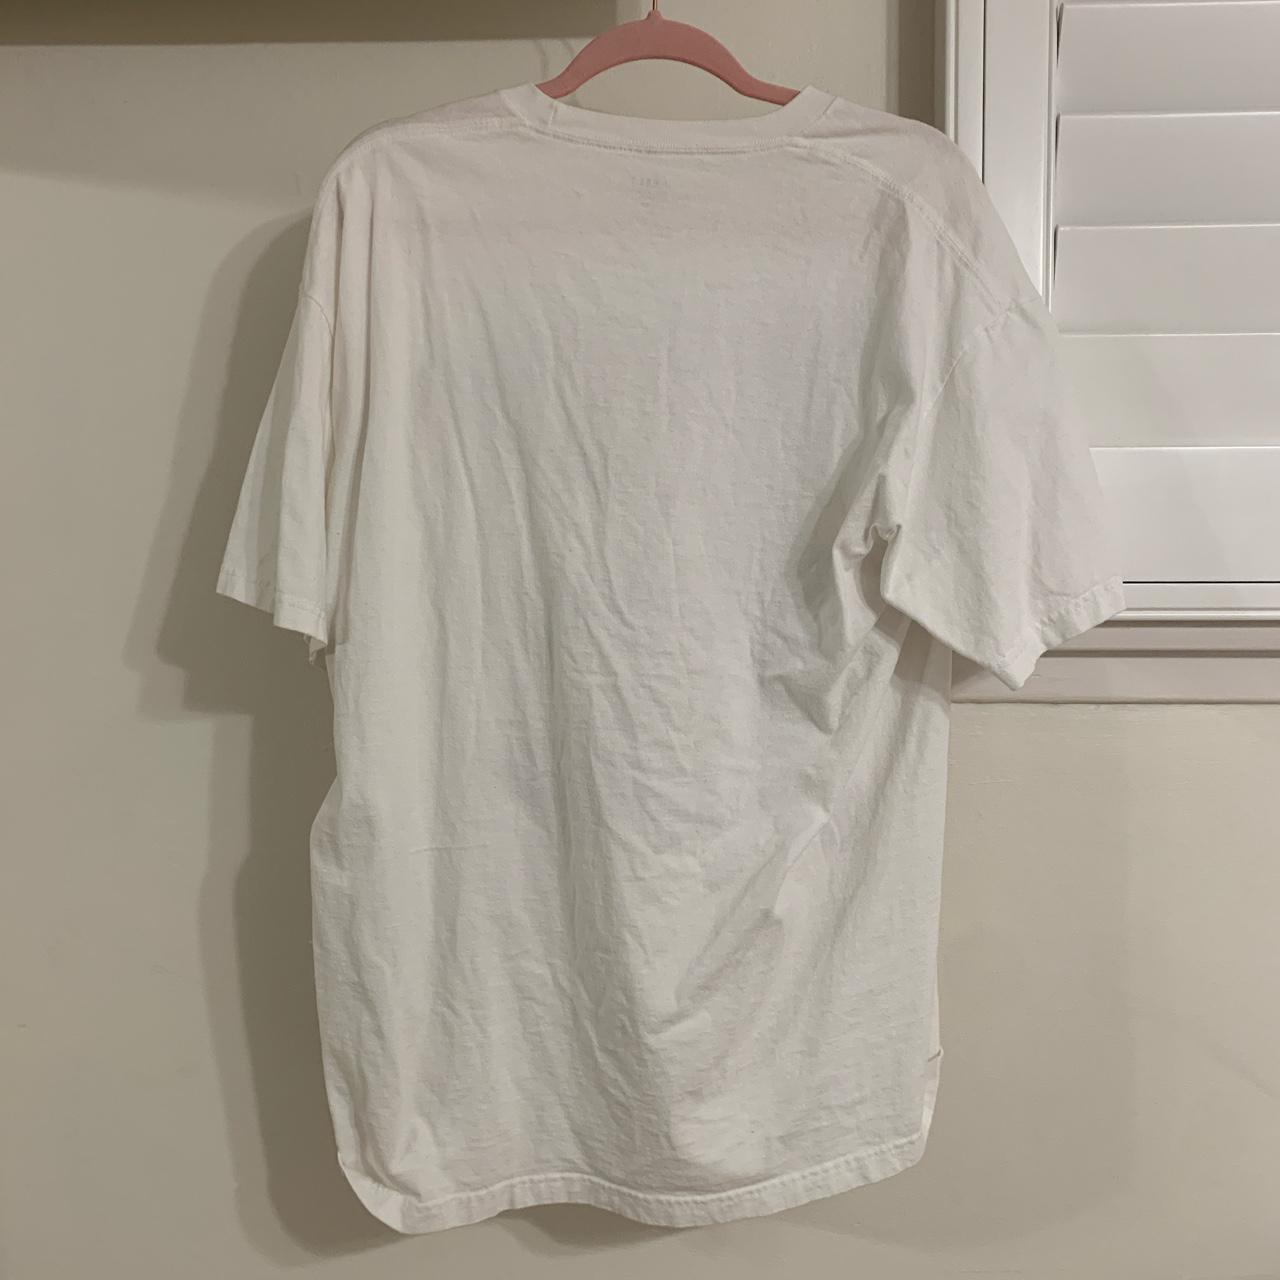 Product Image 4 - Brandy Melville Oversized Racer Tee

Super